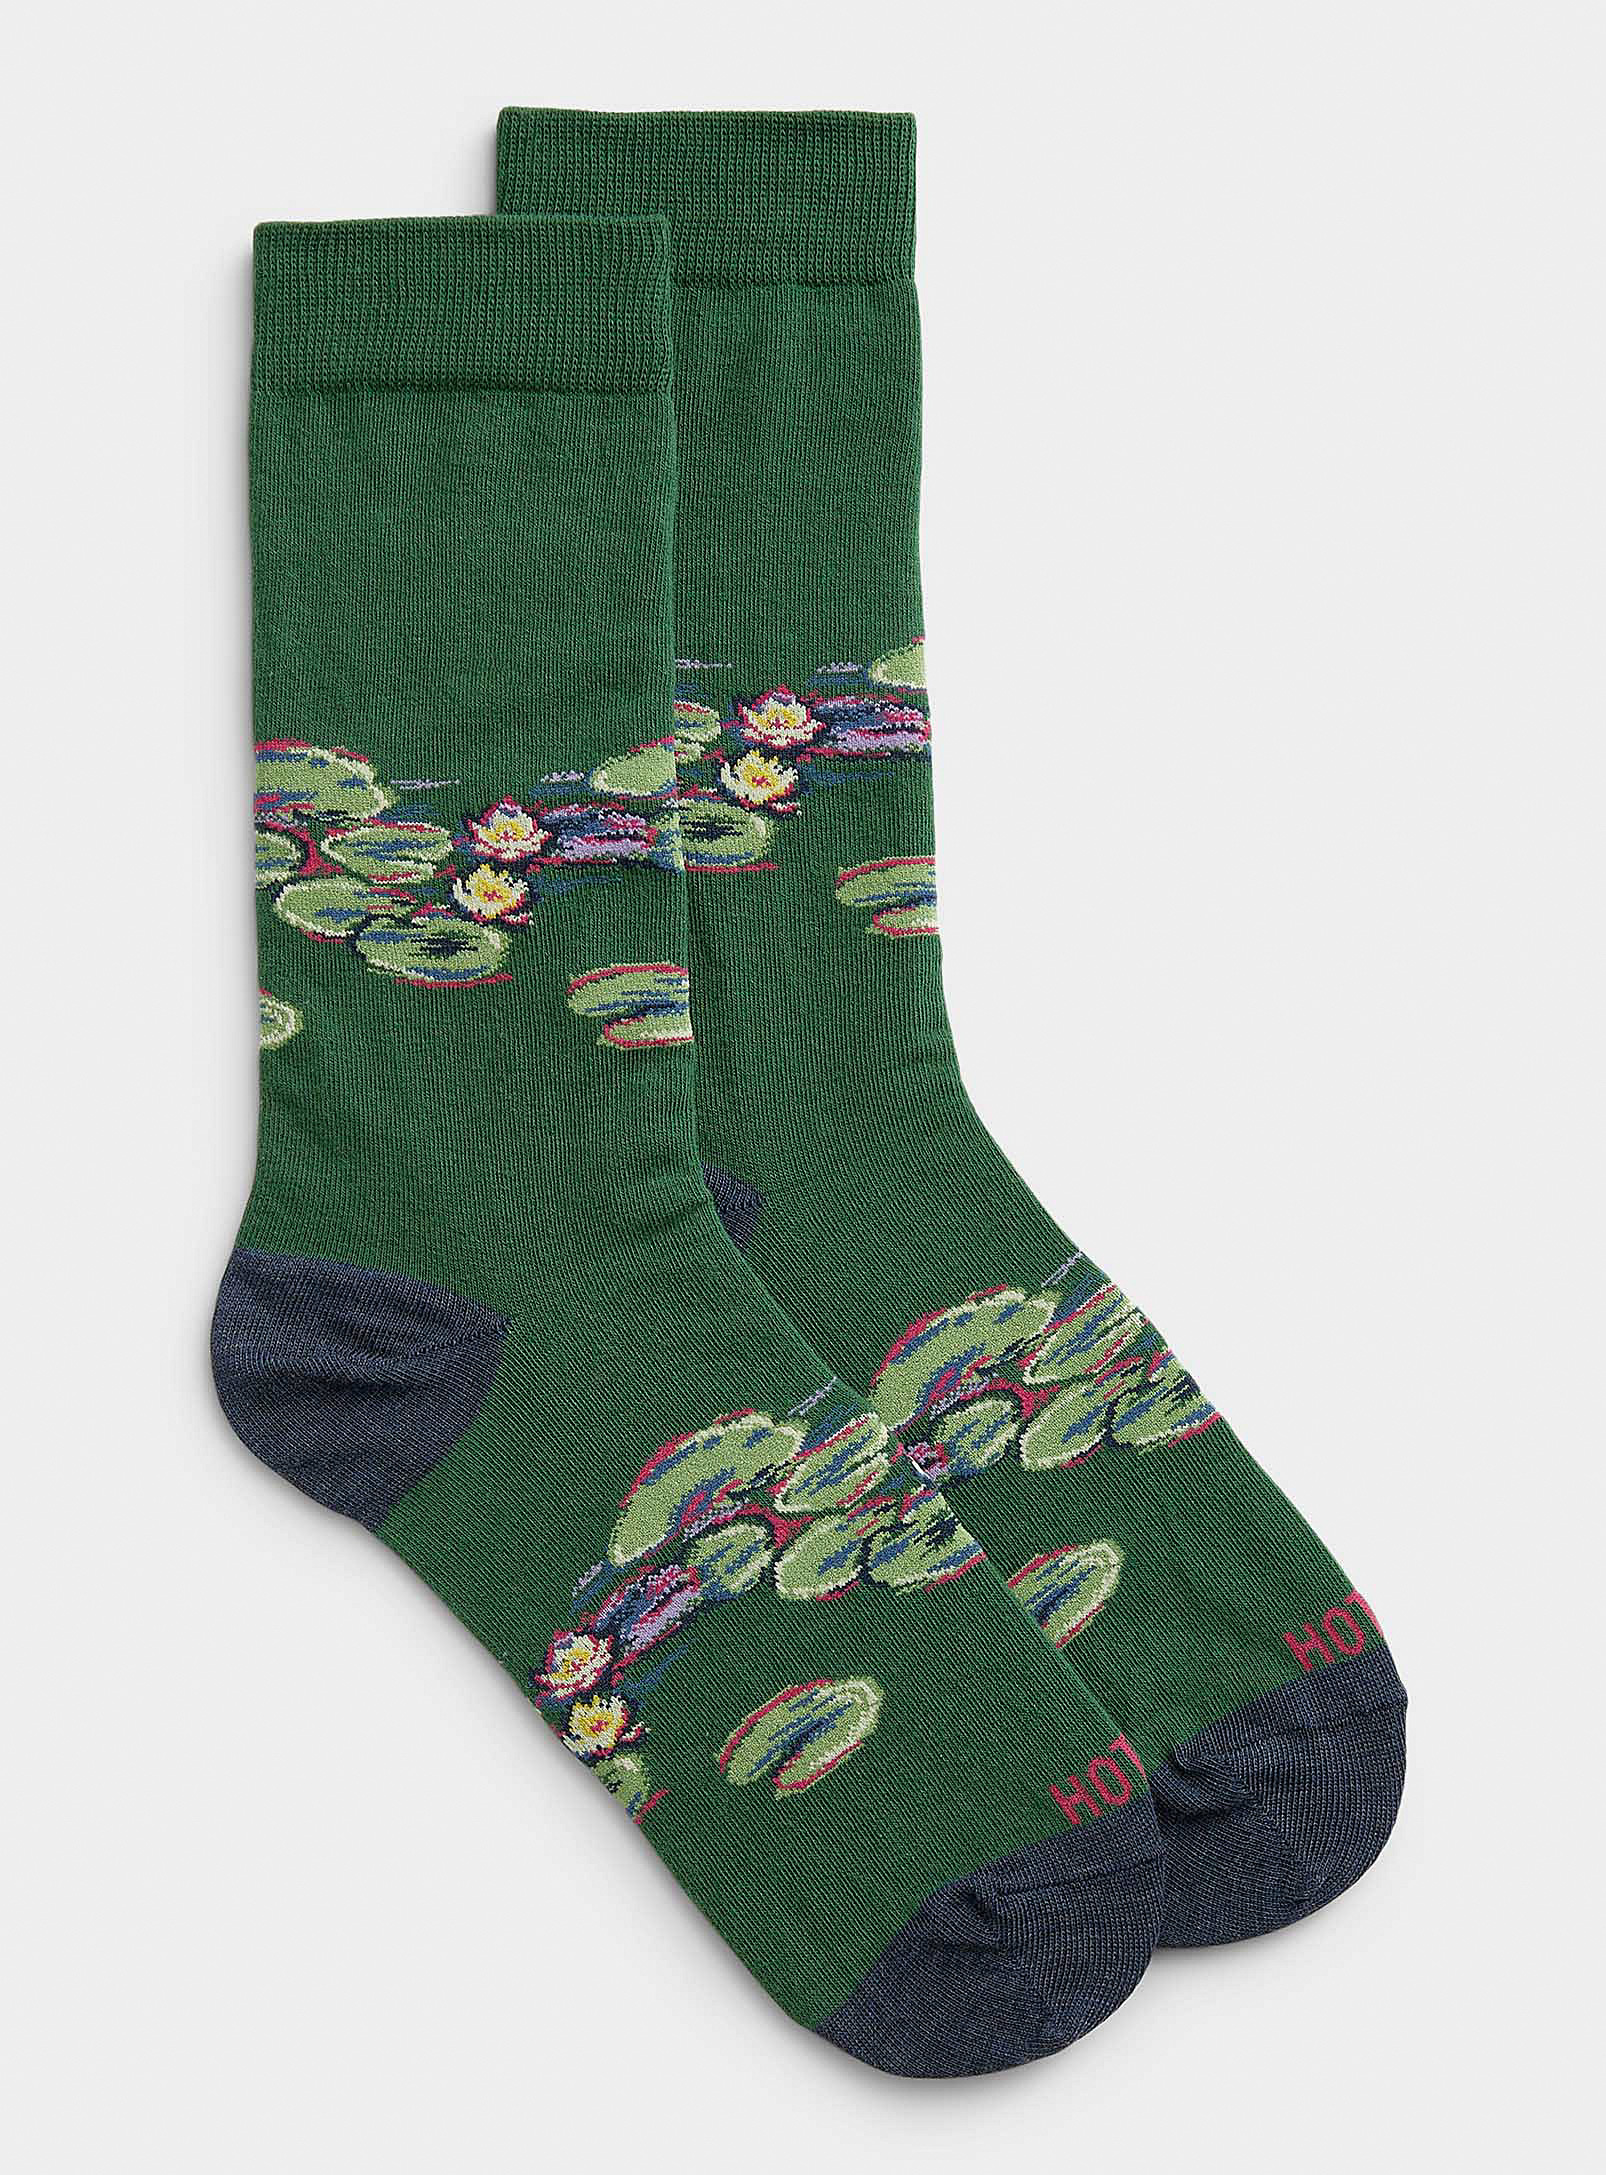 Hot Sox Monet's Water Lilies Sock In Mossy Green